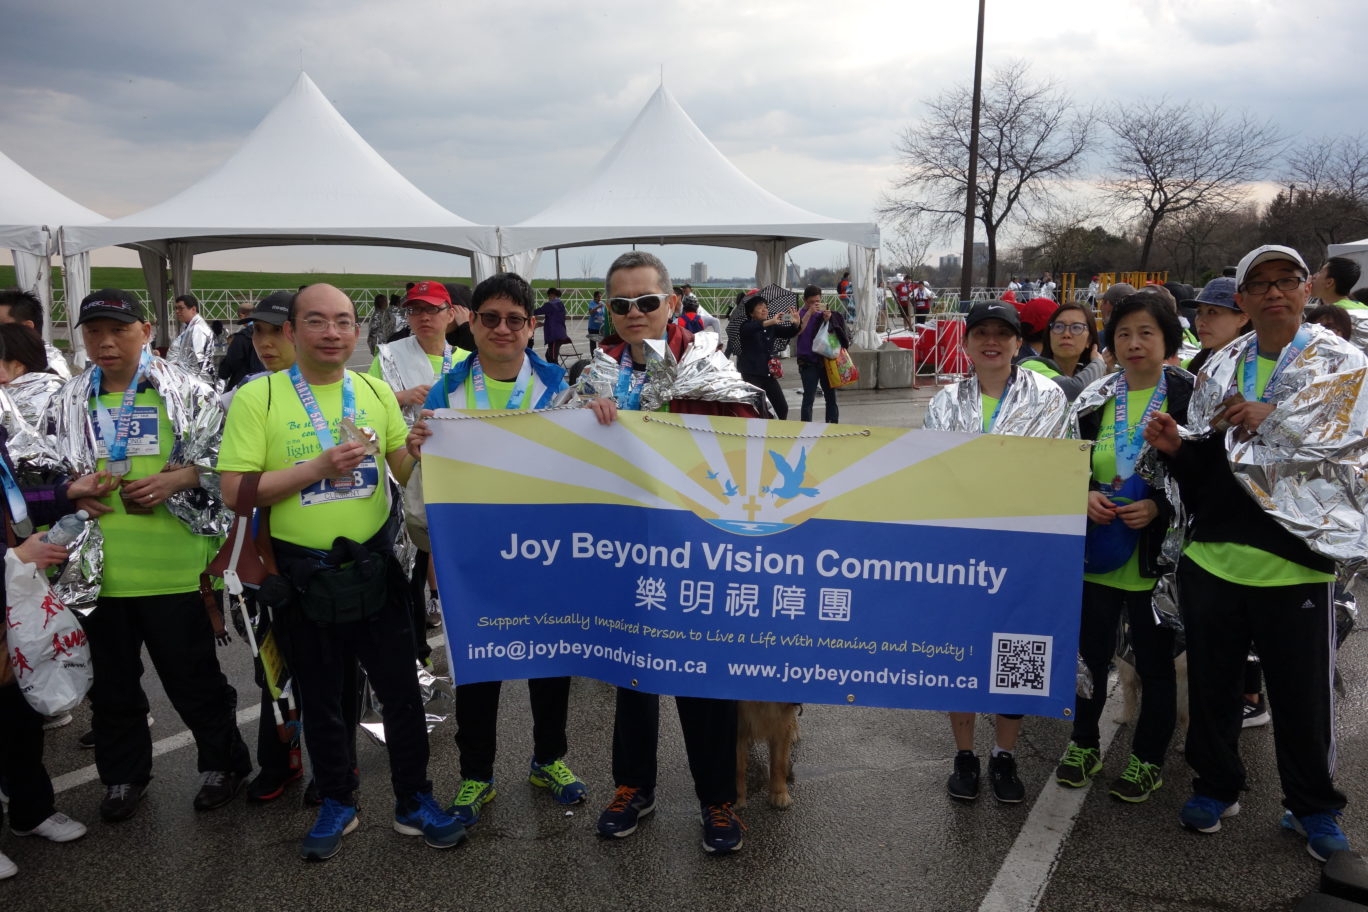 Pastor Danny and other VIP runners with their medals on the neck holding JBVC banner at the finish location